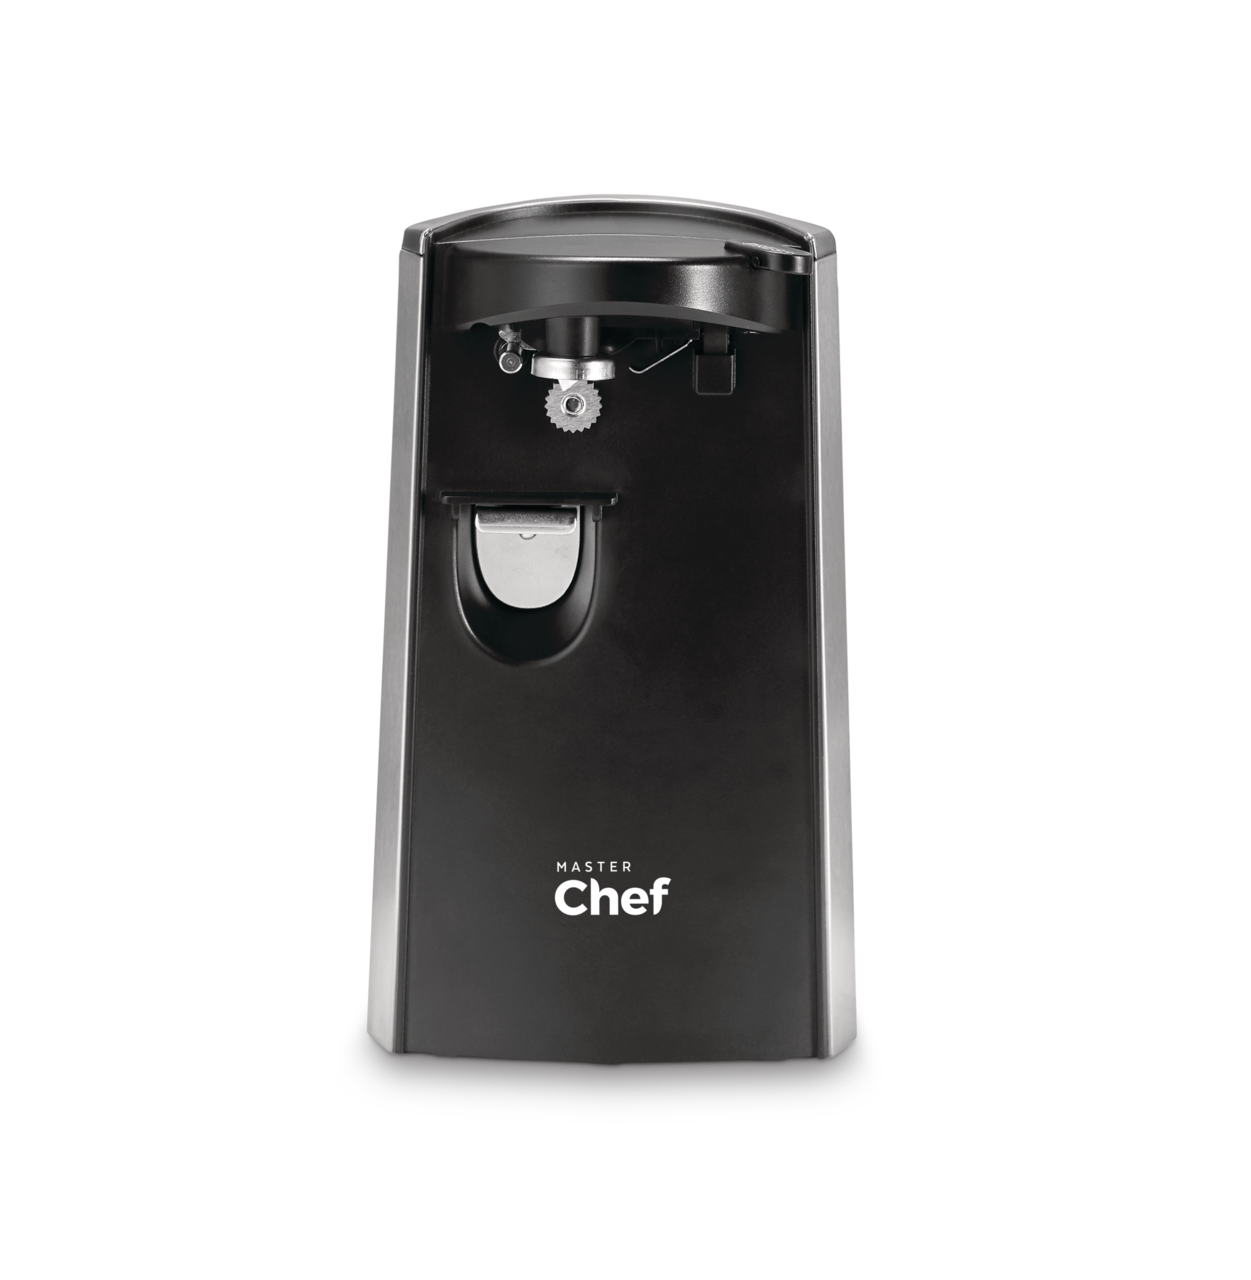 https://media-www.canadiantire.ca/product/living/kitchen/kitchen-appliances/0432757/master-chef-electric-can-opener-bac17c4e-46d8-4efd-8099-5f2cbf863996.png?imdensity=1&imwidth=640&impolicy=mZoom